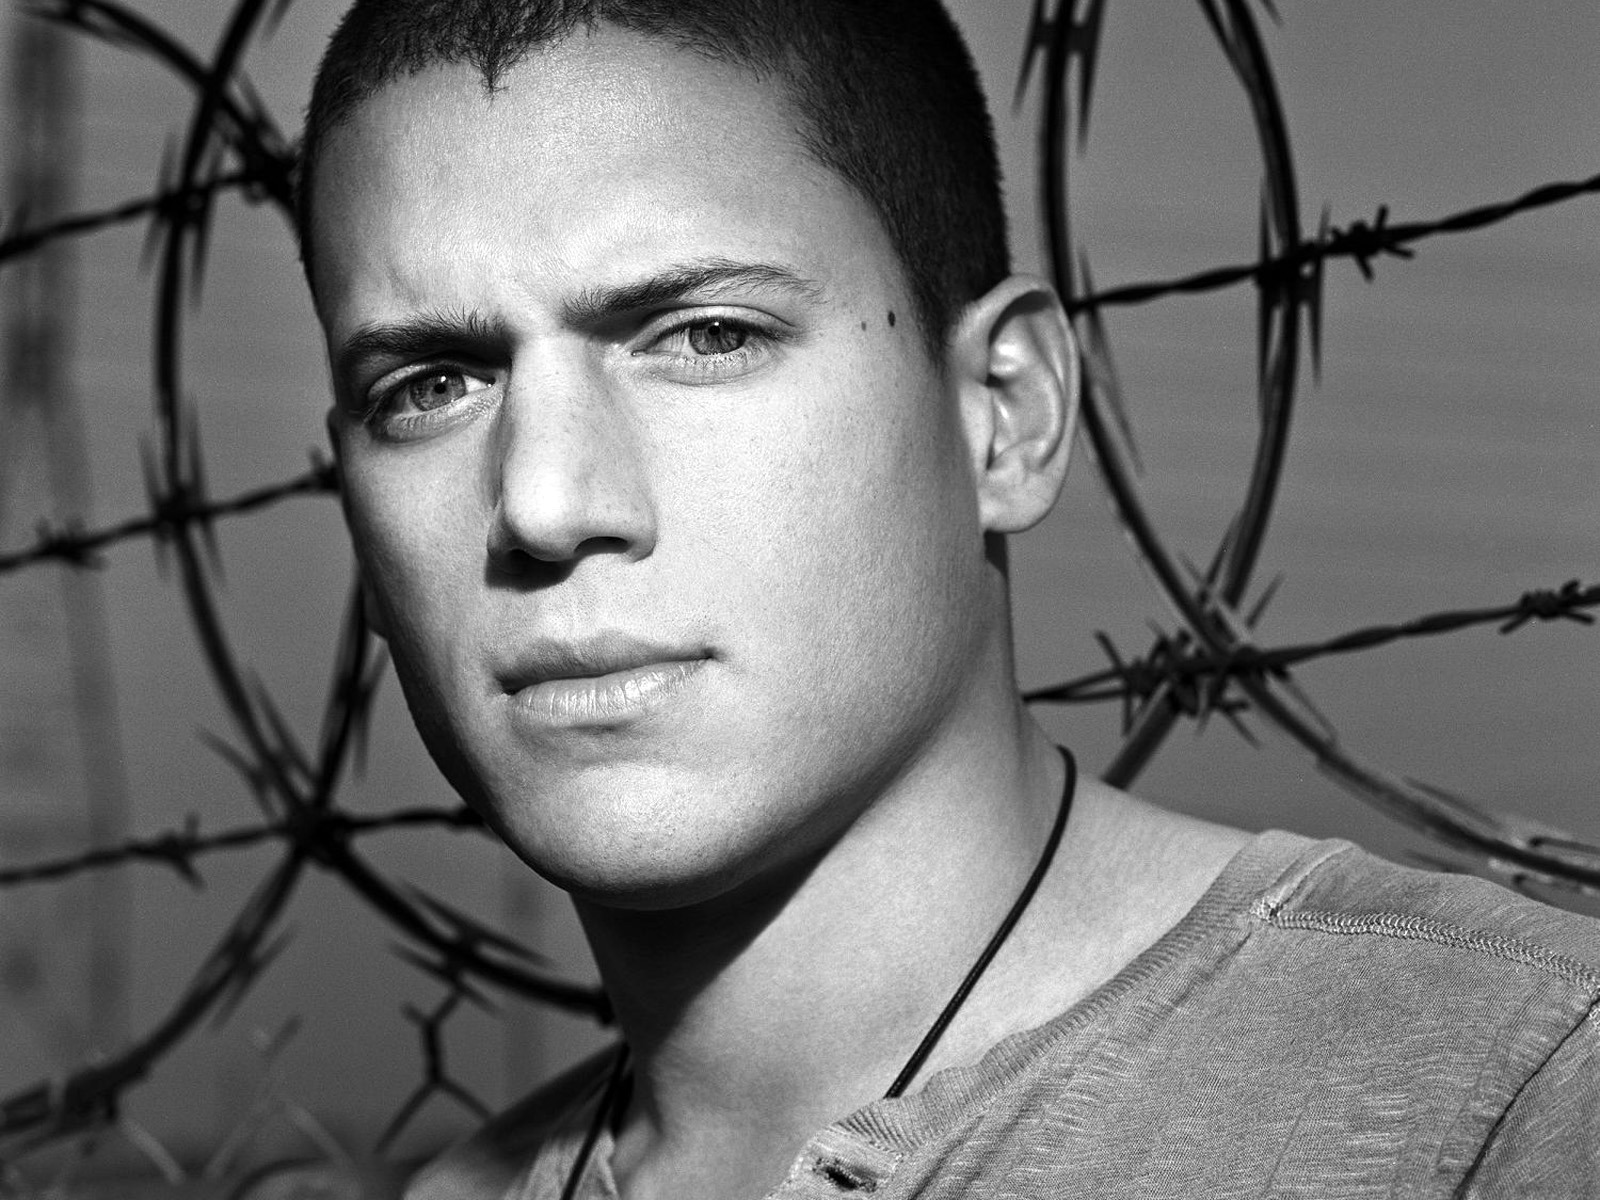 as Michael Scofield in the